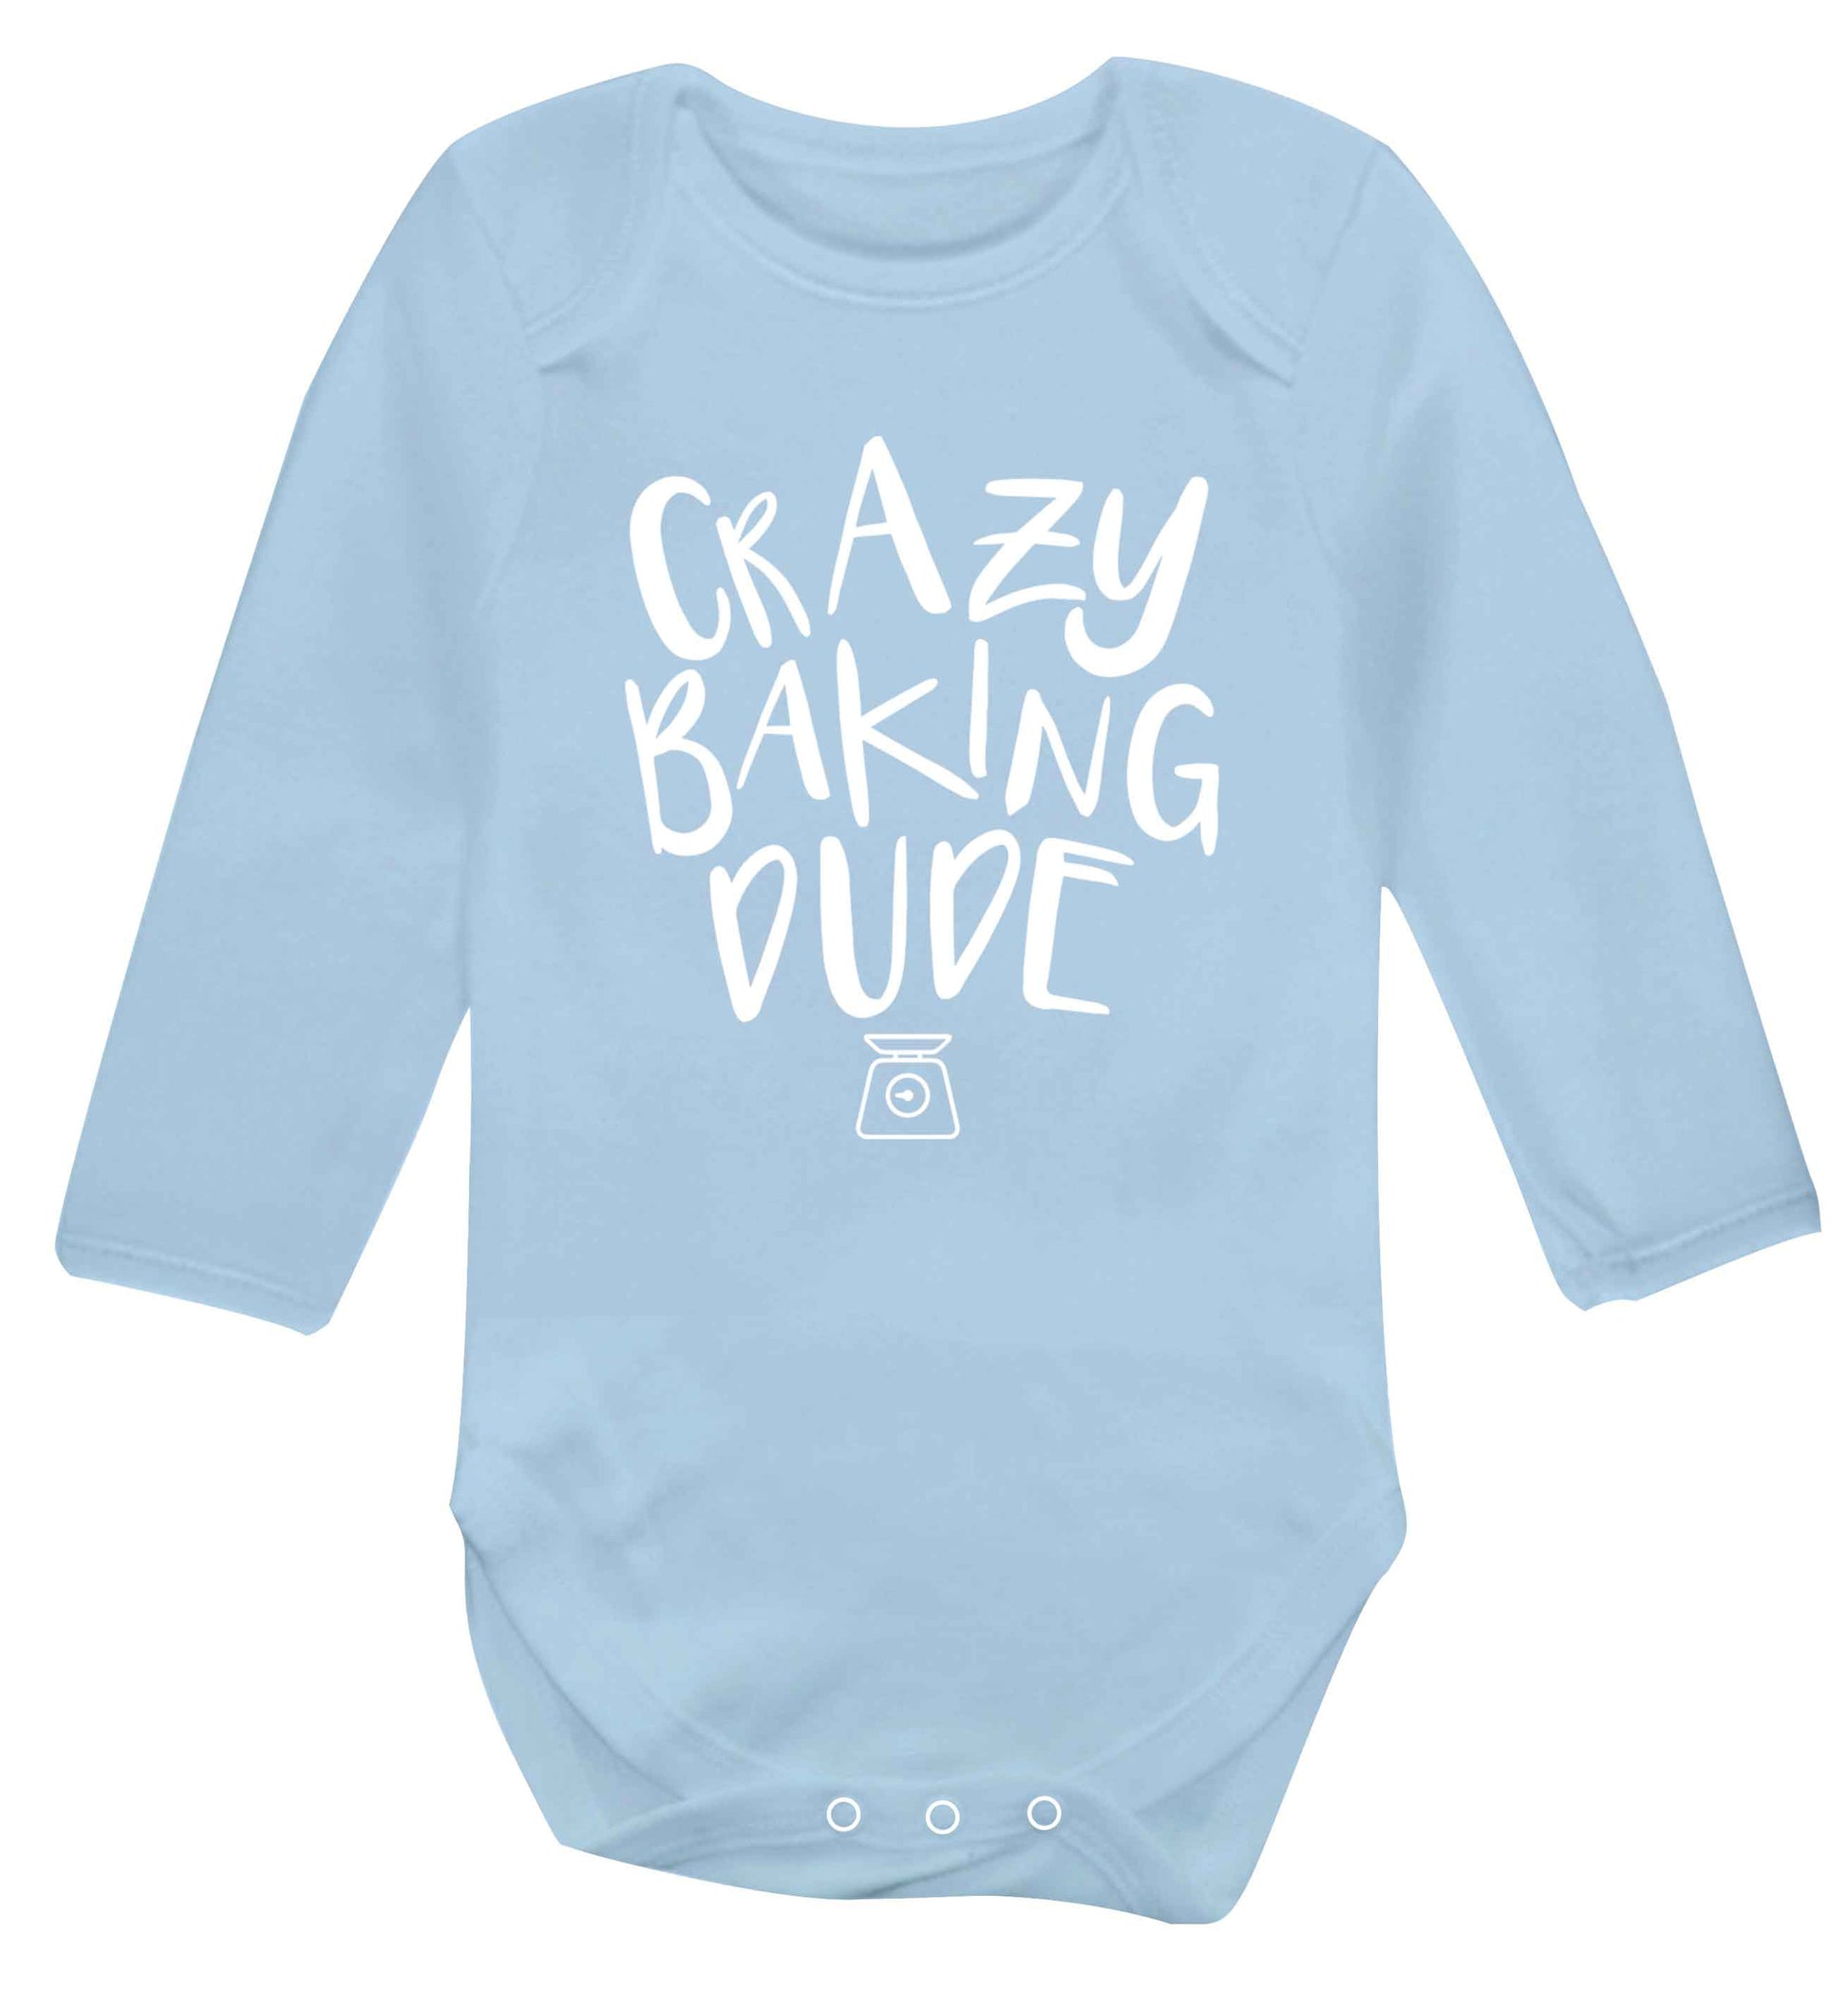 Crazy baking dude Baby Vest long sleeved pale blue 6-12 months